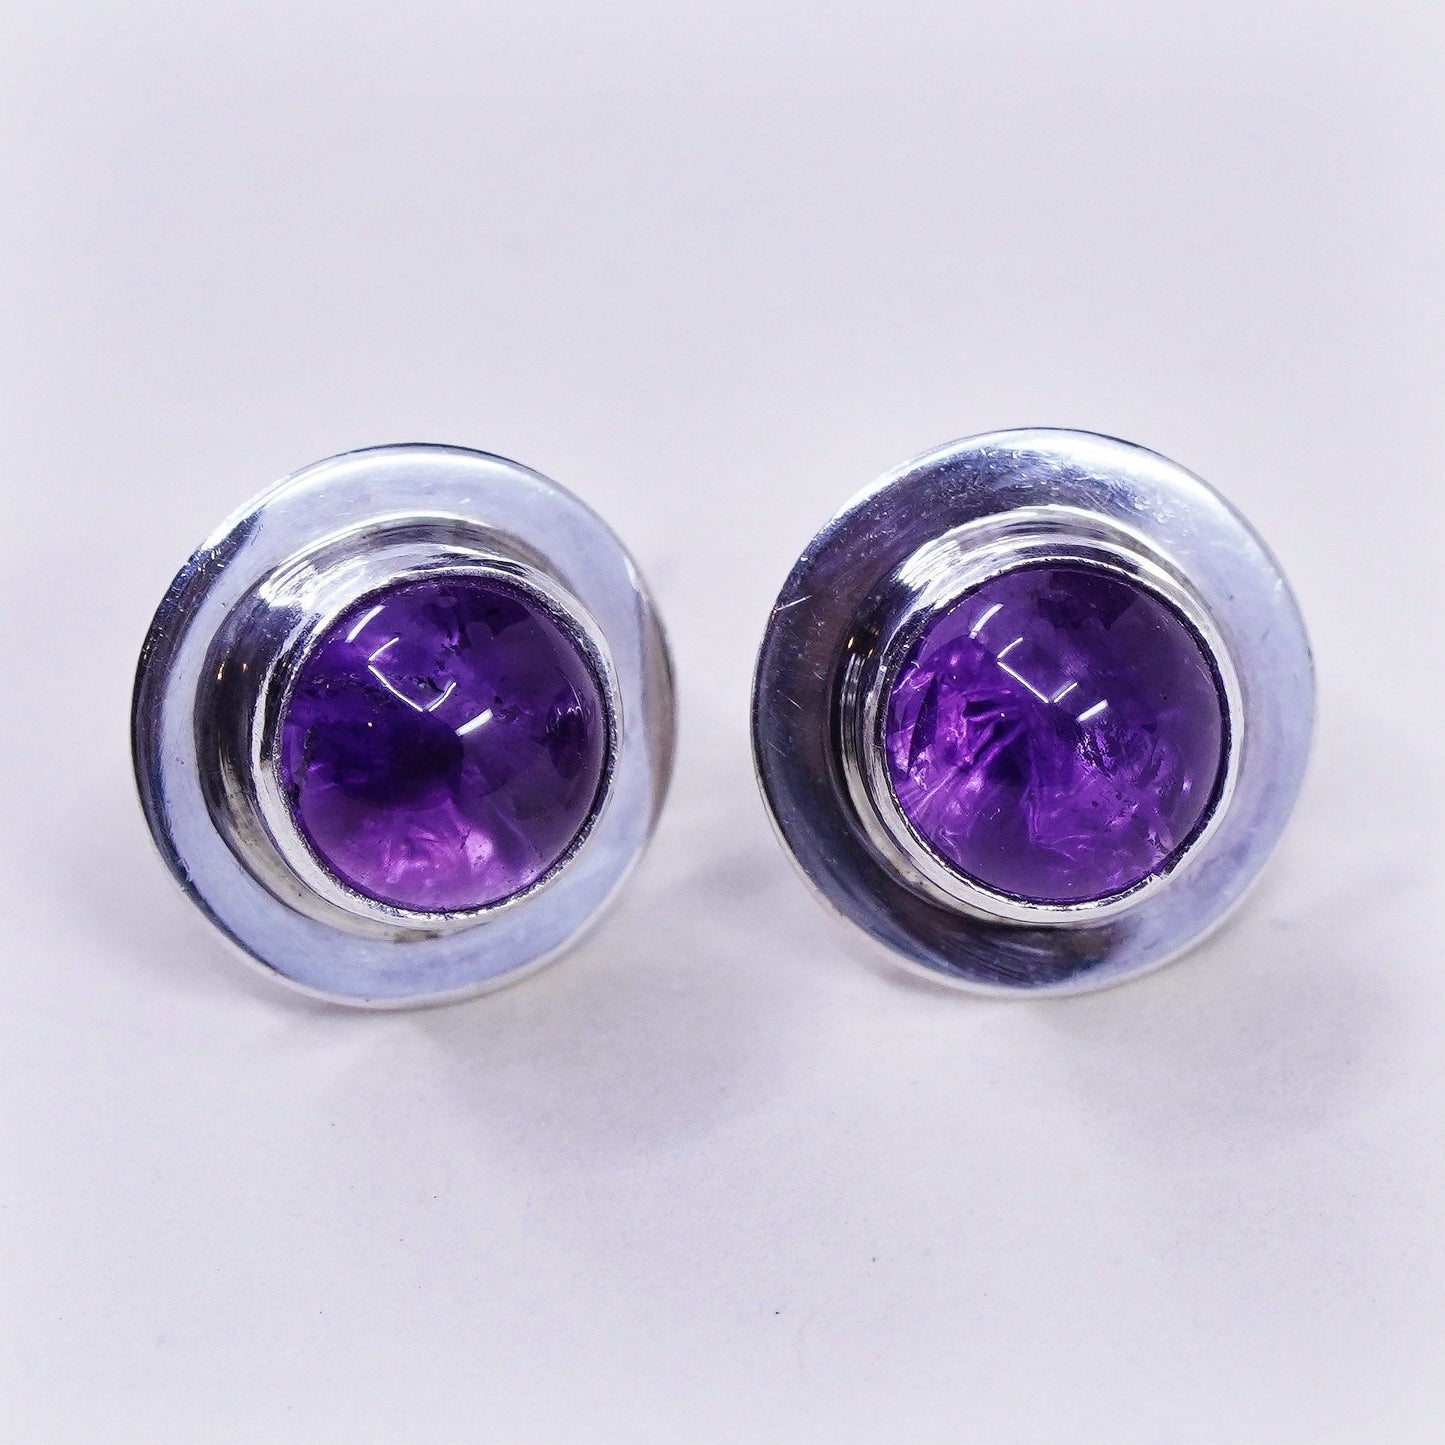 Vintage sterling silver earrings, 925 studs with round amethyst